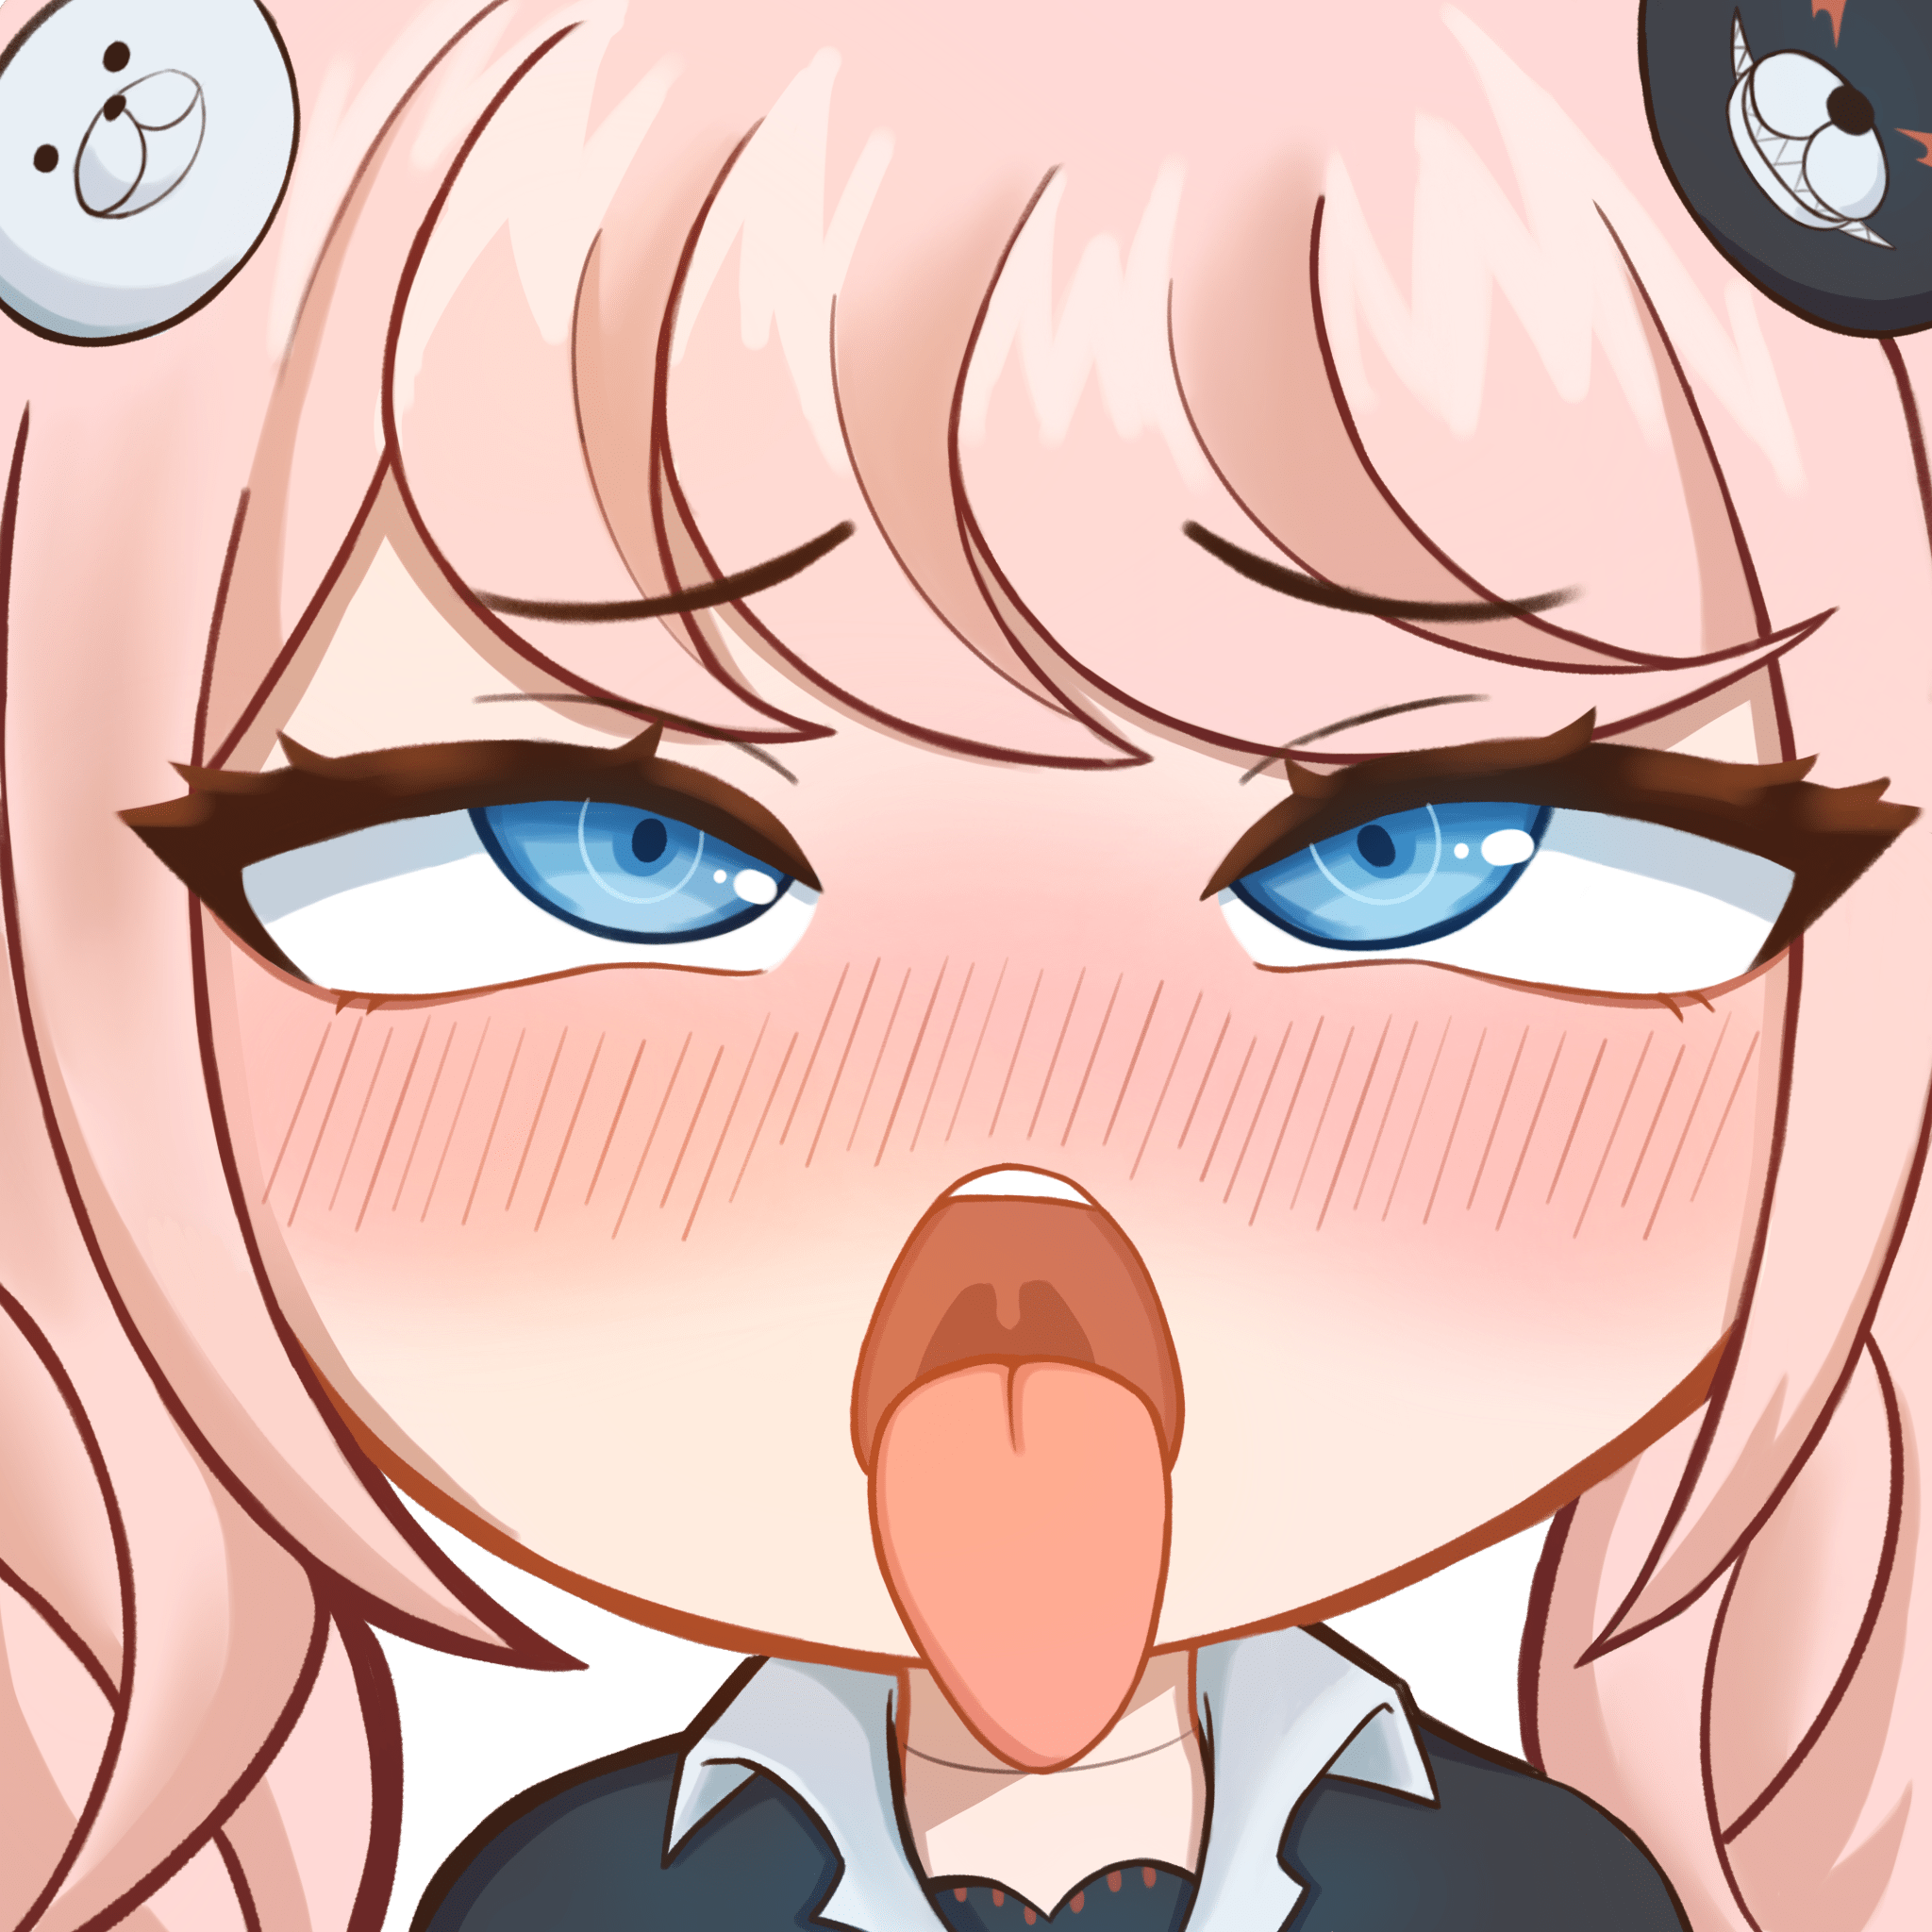 anime girl with ahegao expression